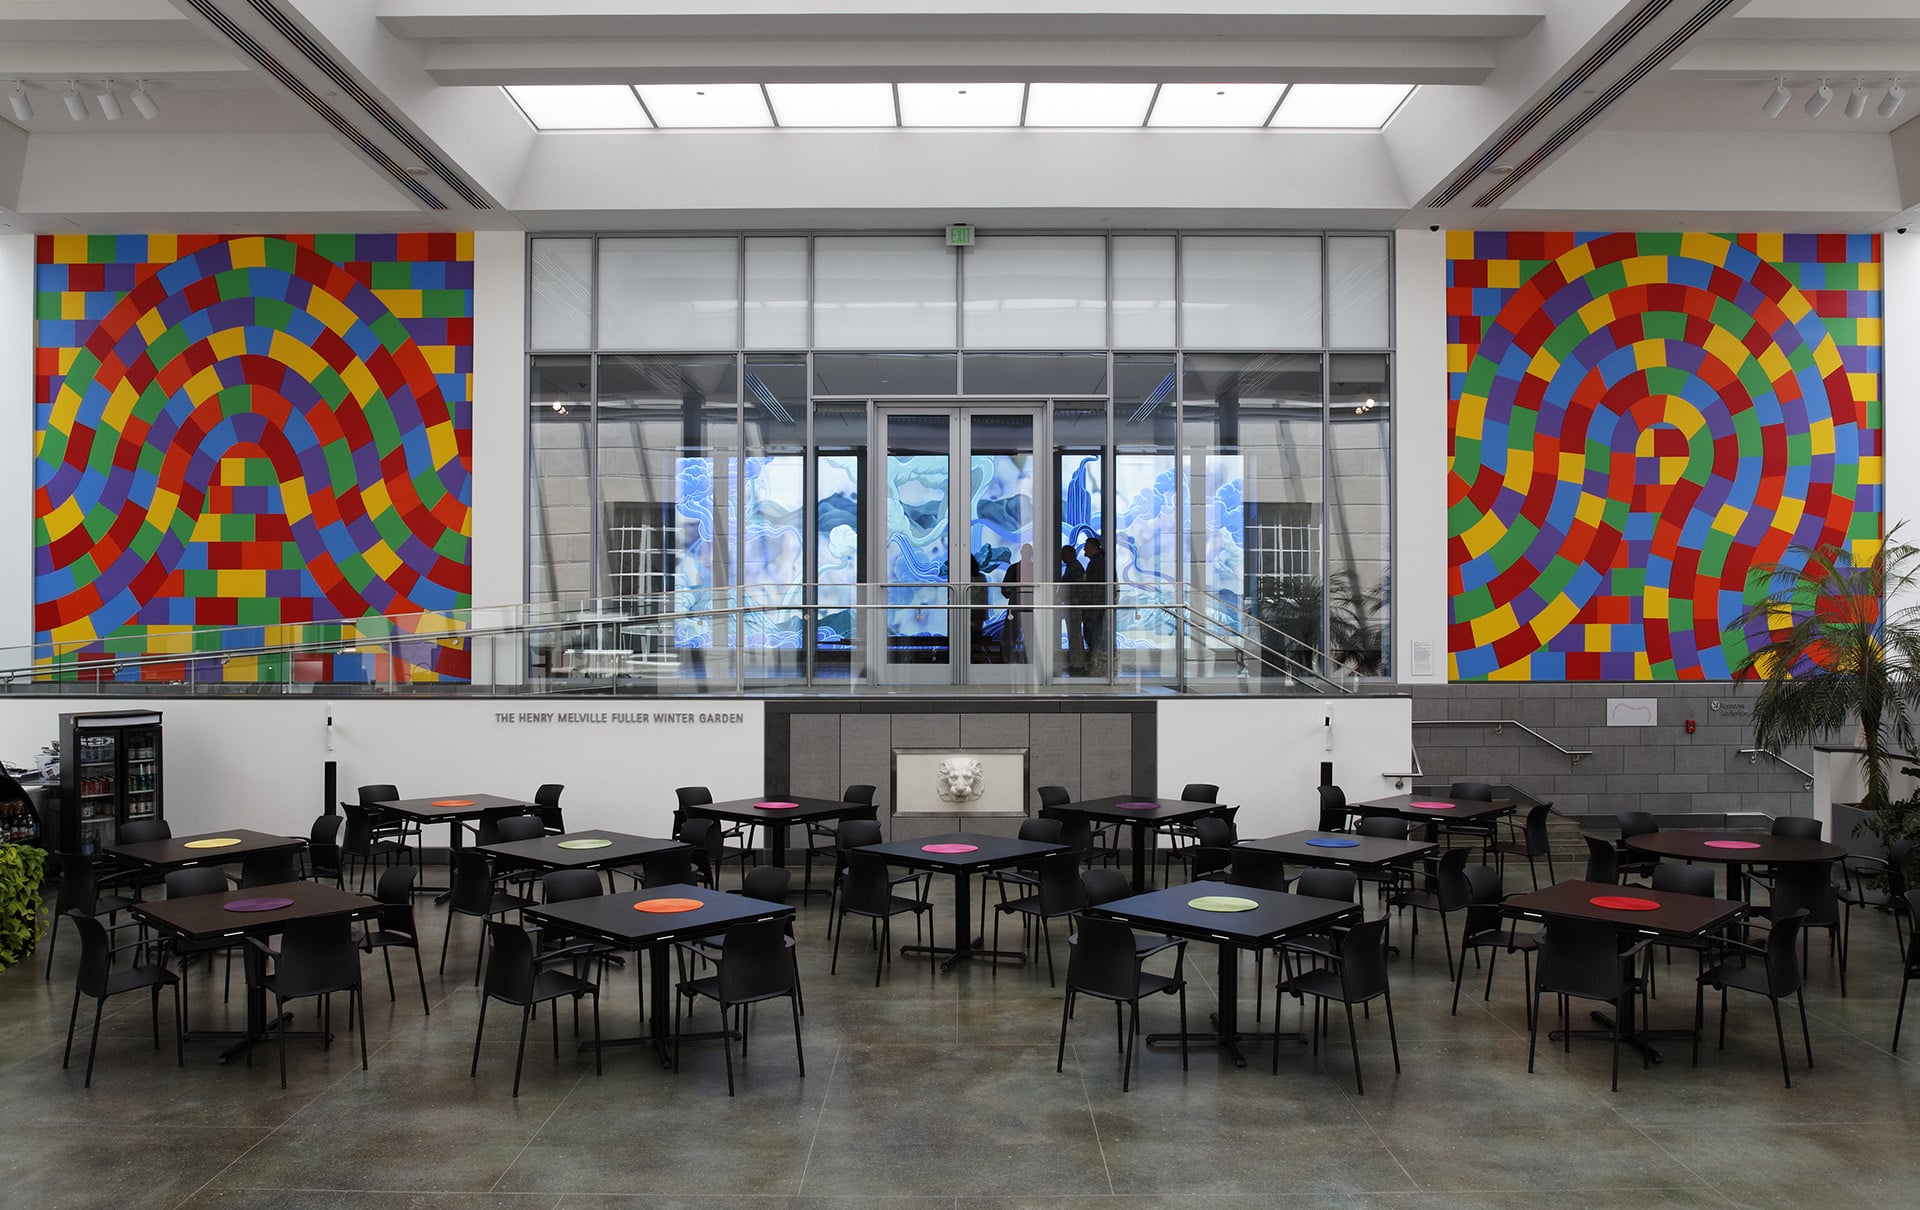 a mural of yellow, blue, red, orange, green, and purple squares on a cafeteria wall